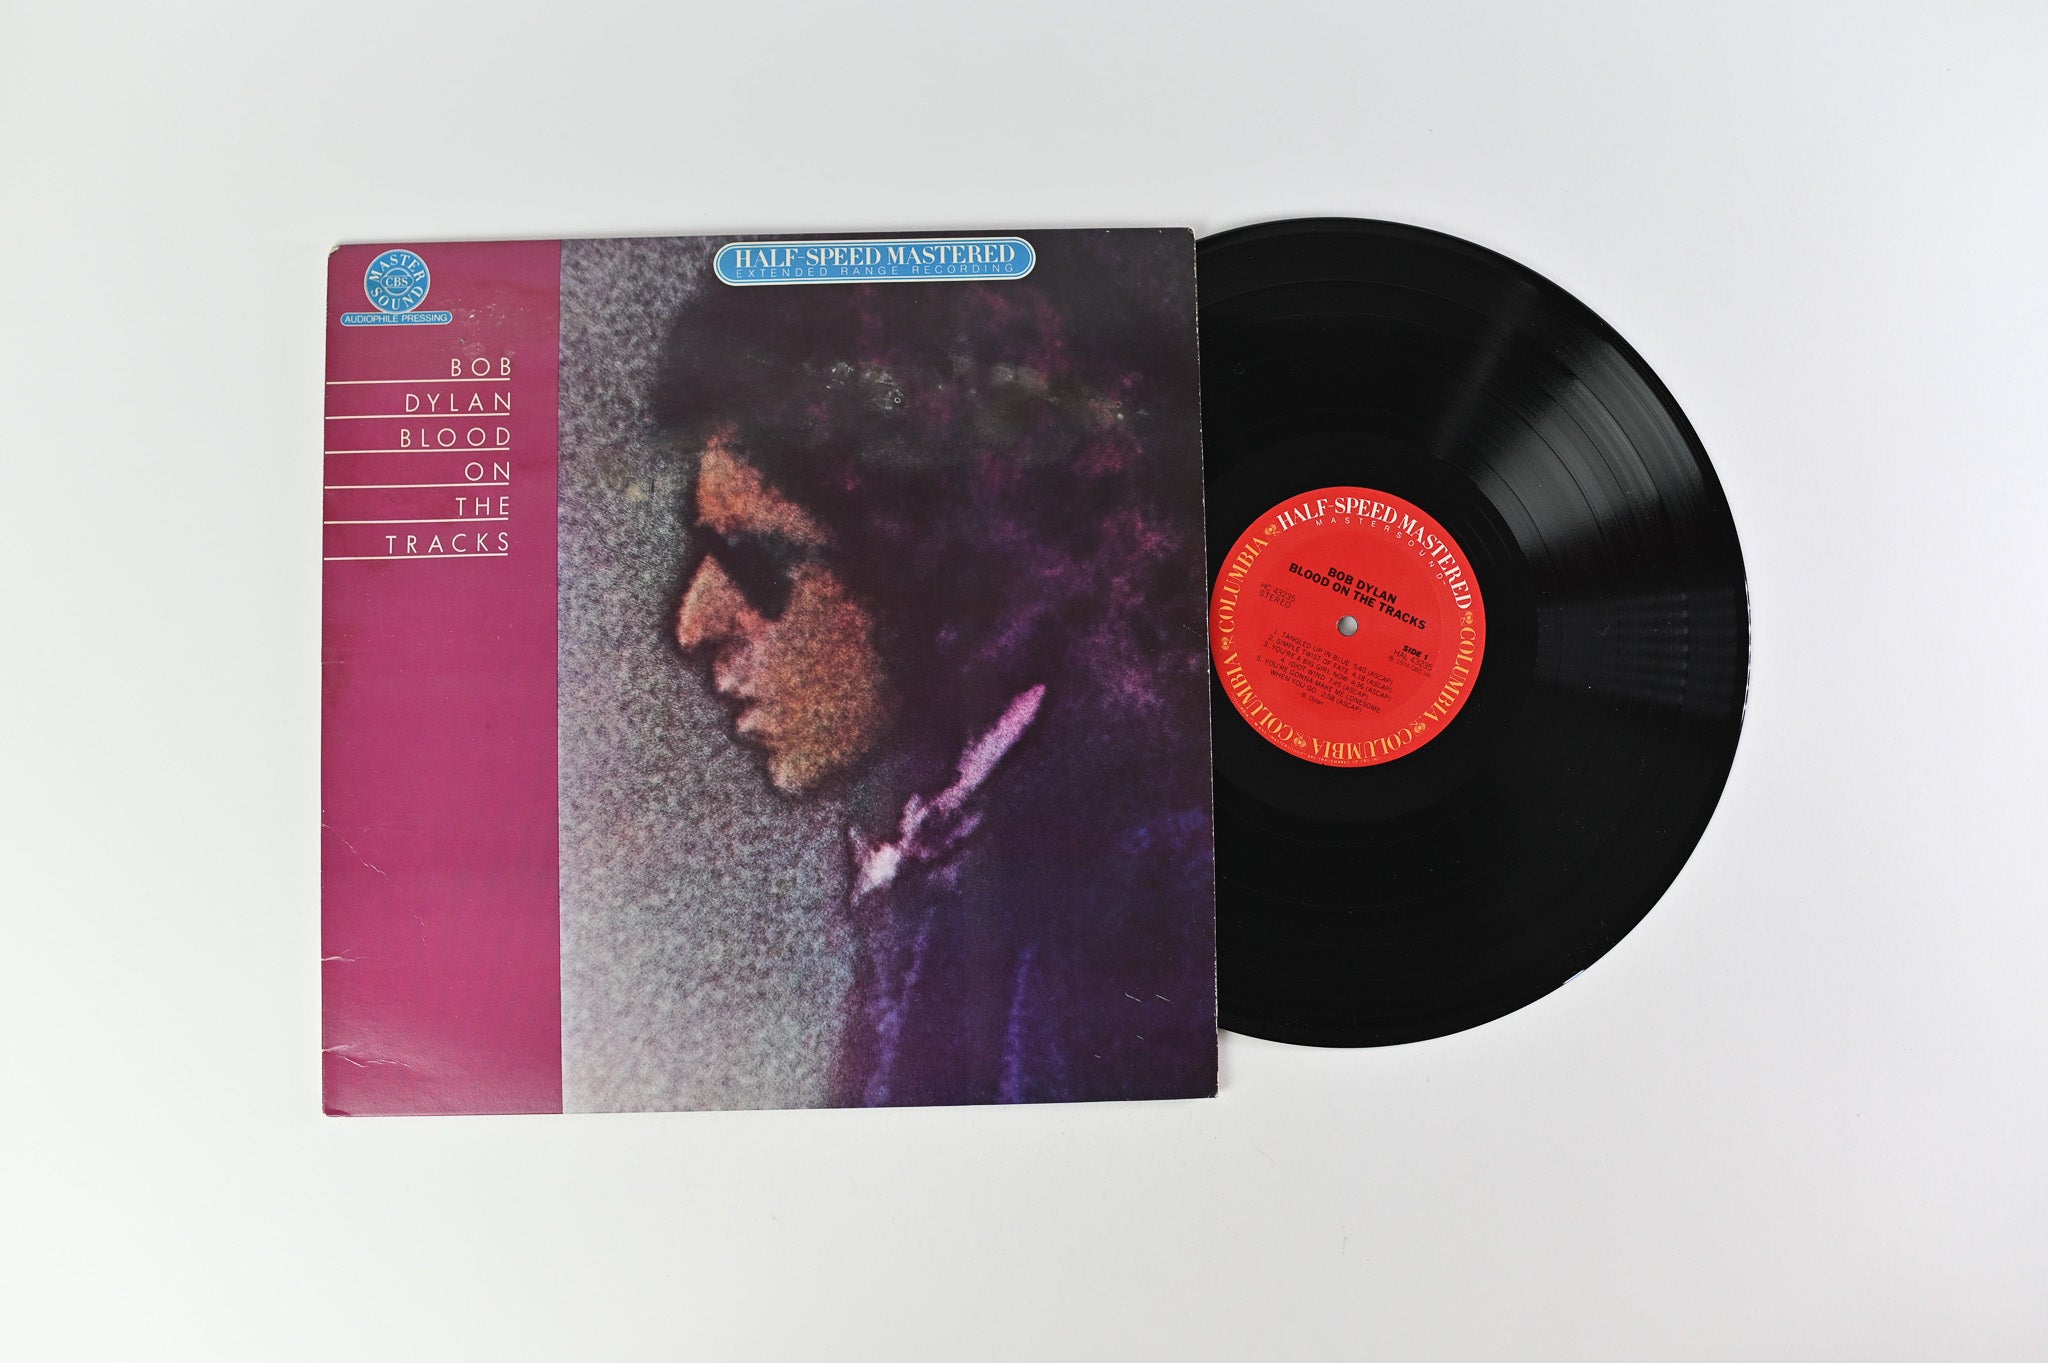 Bob Dylan - Blood On The Tracks on Columbia - CBS Mastersound Half-Speed Mastered